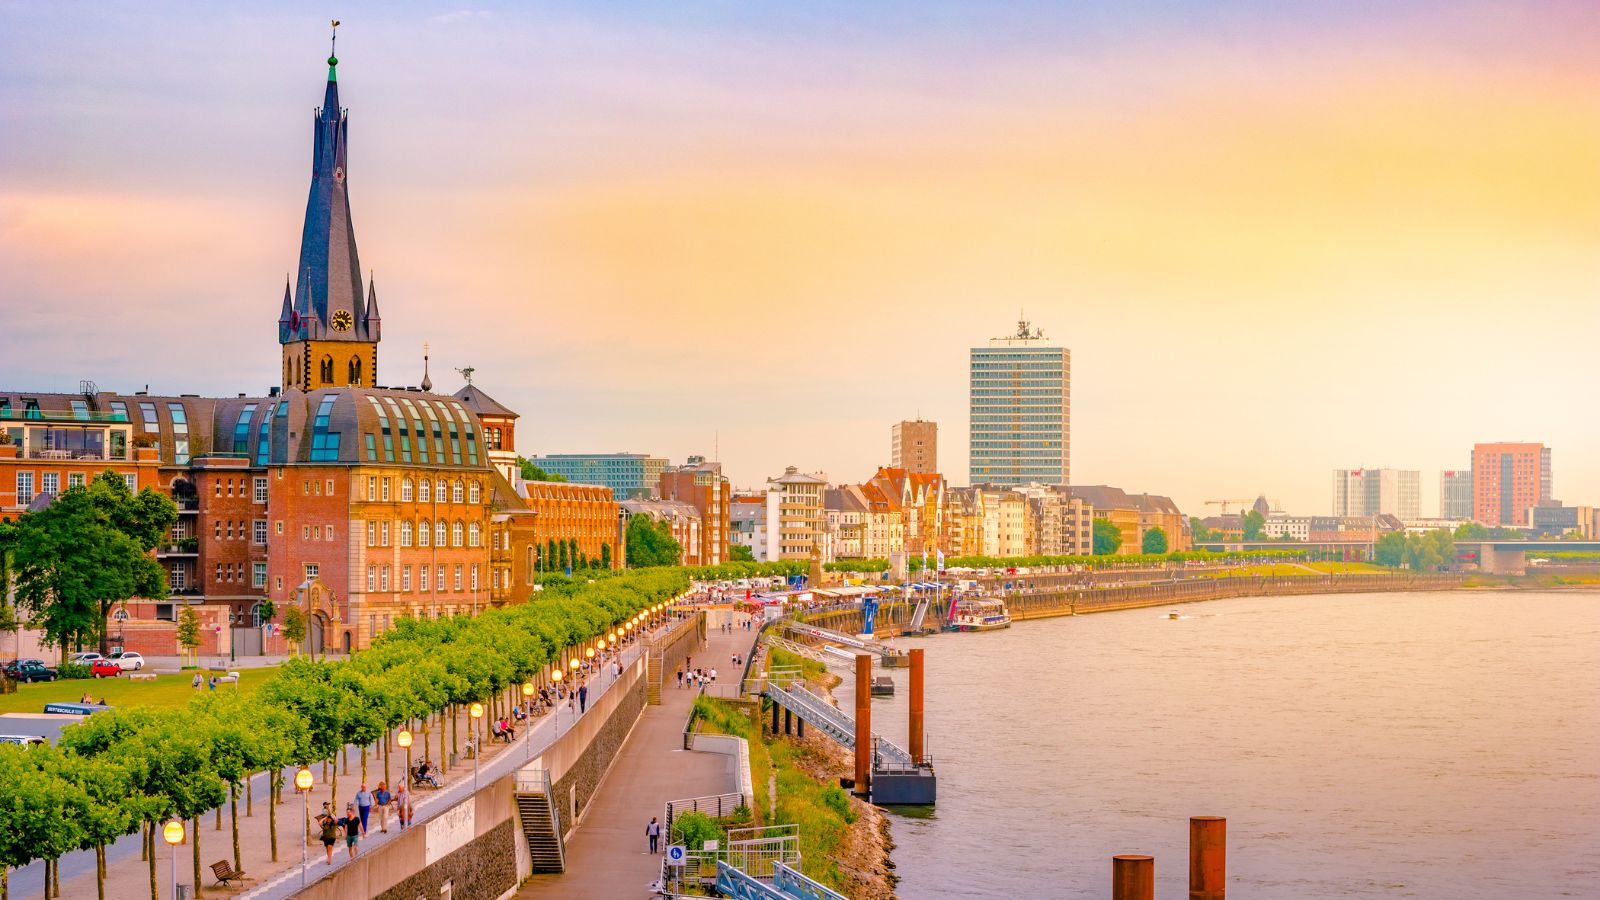 A view at the city skyline central Dusseldorf from the rhine river, Dusselfdorf Germany. Colorful panorama of german city at sunset.